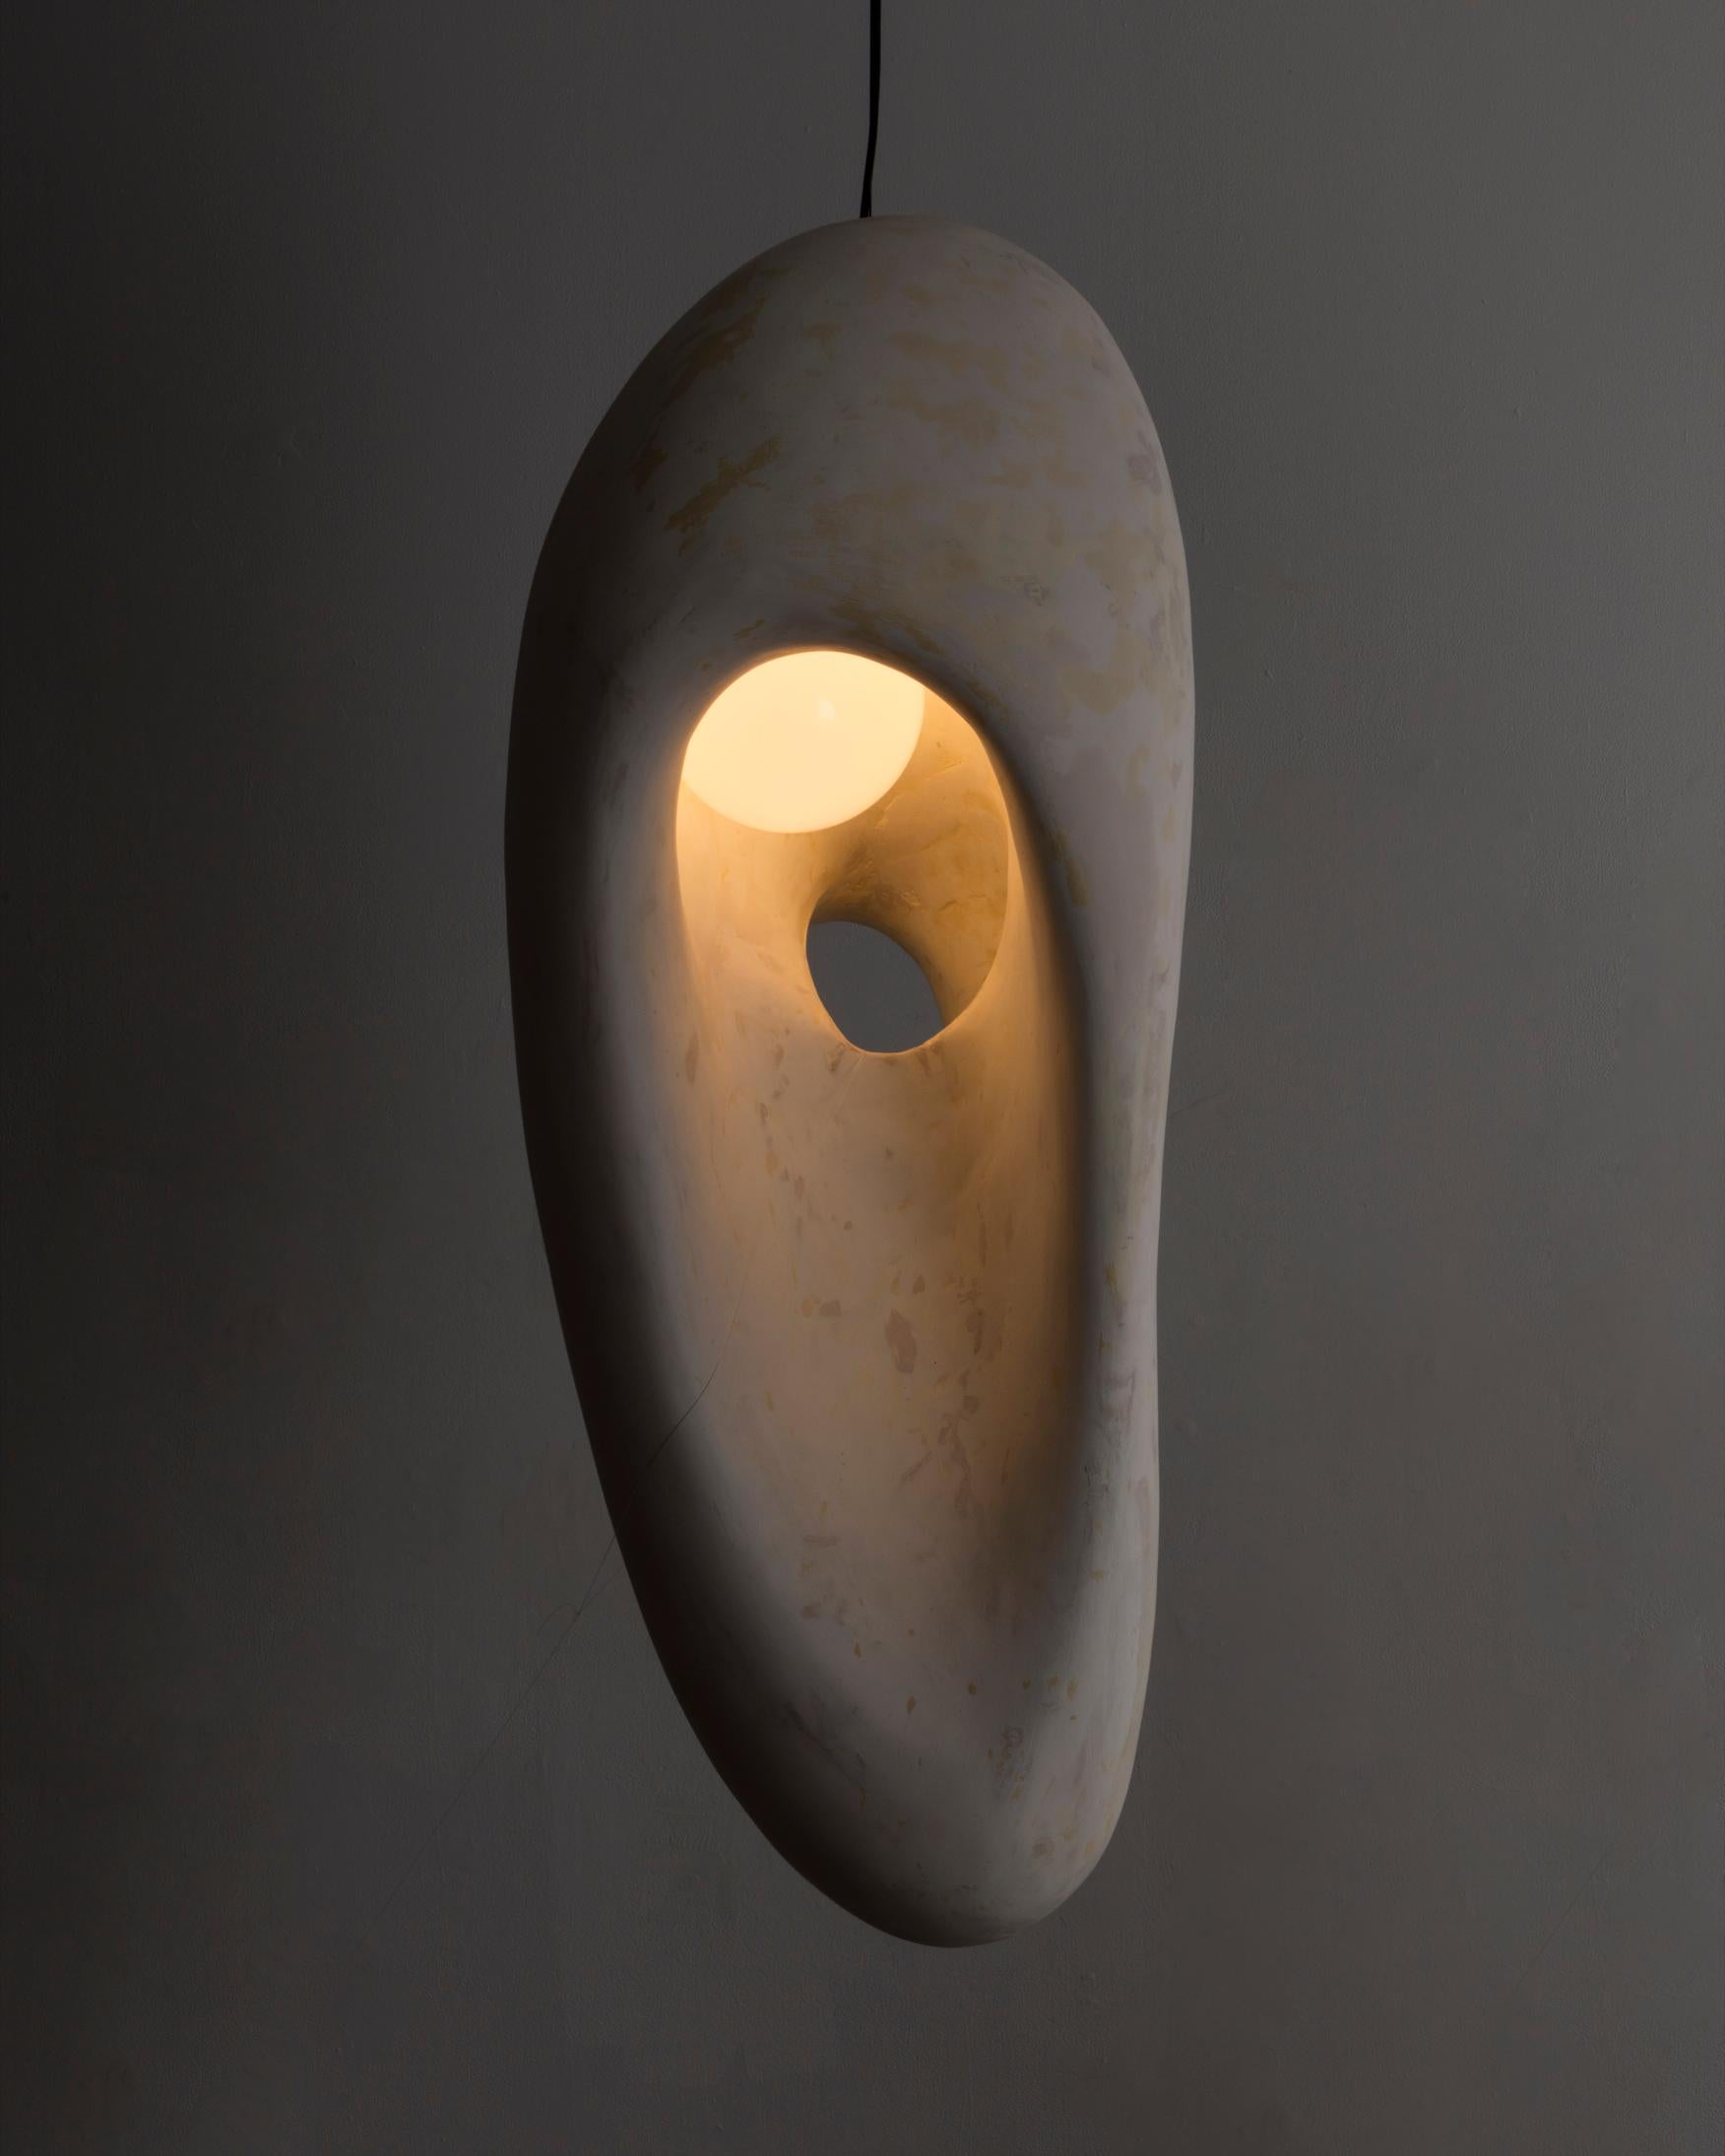 Sculptural illuminated form in surfboard foam. Designed and made by Rogan Gregory, USA, 2022.